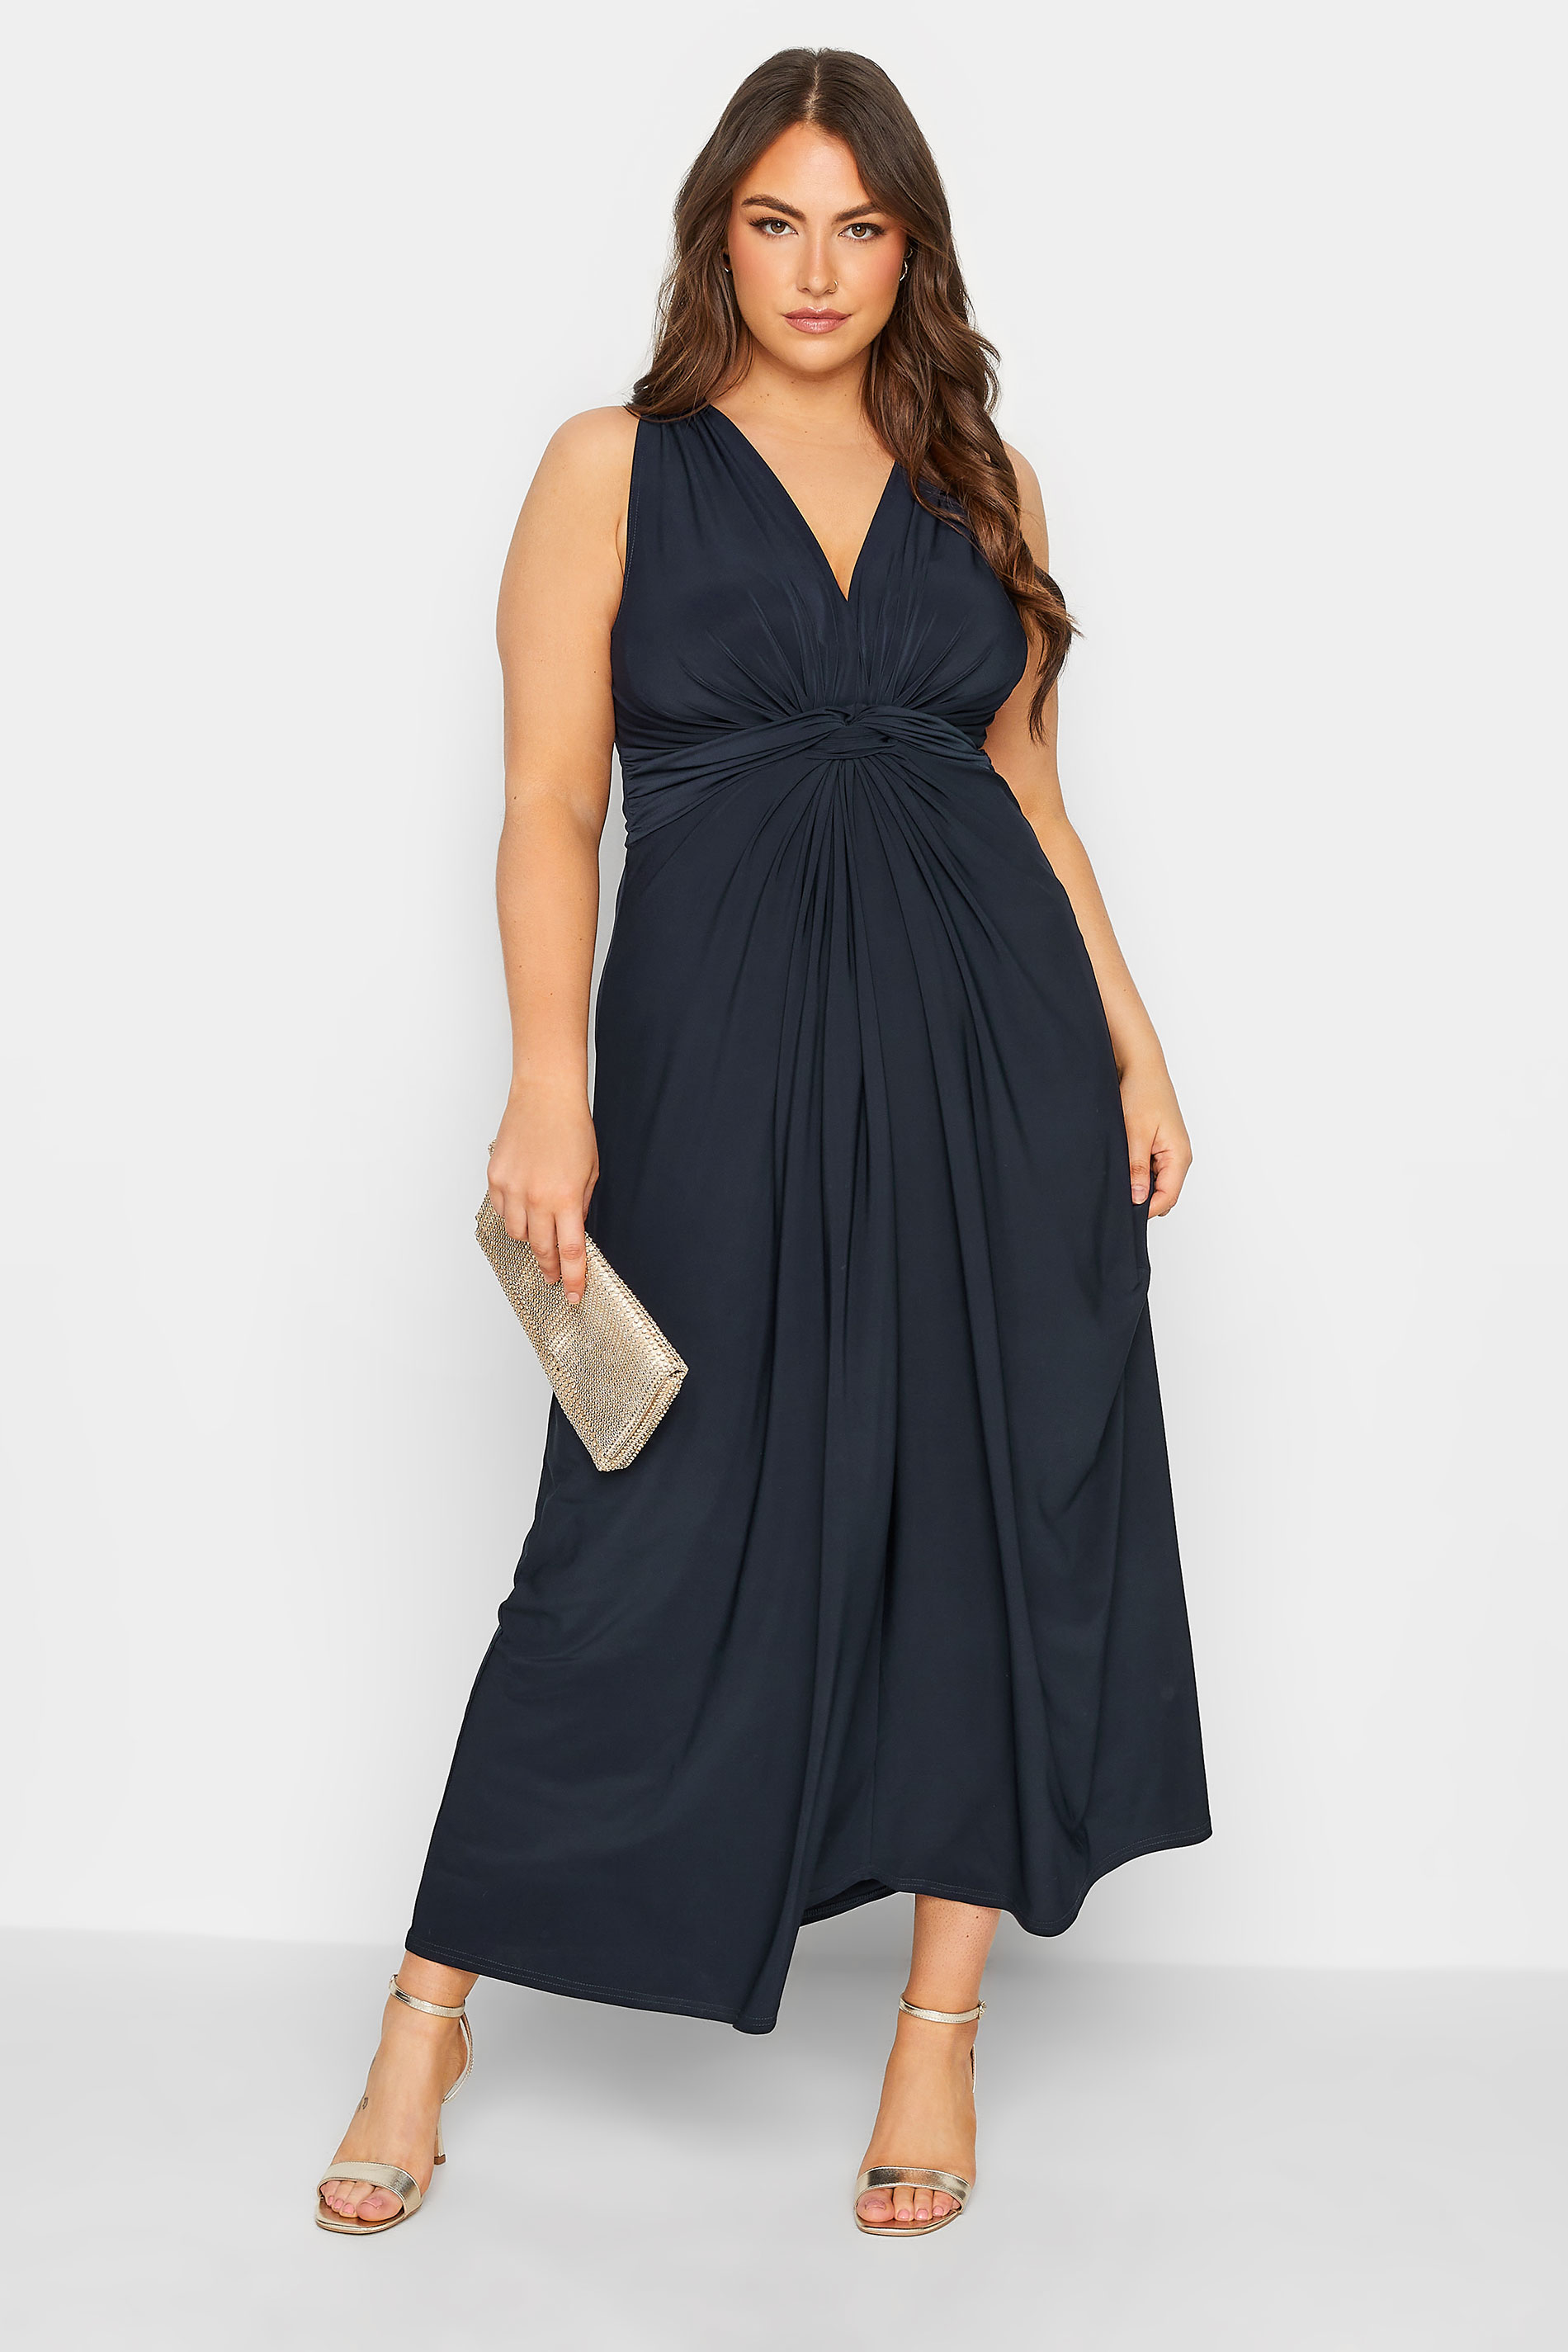 YOURS LONDON Plus Size Navy Blue Knot Front Maxi Dress | Yours Clothing  1